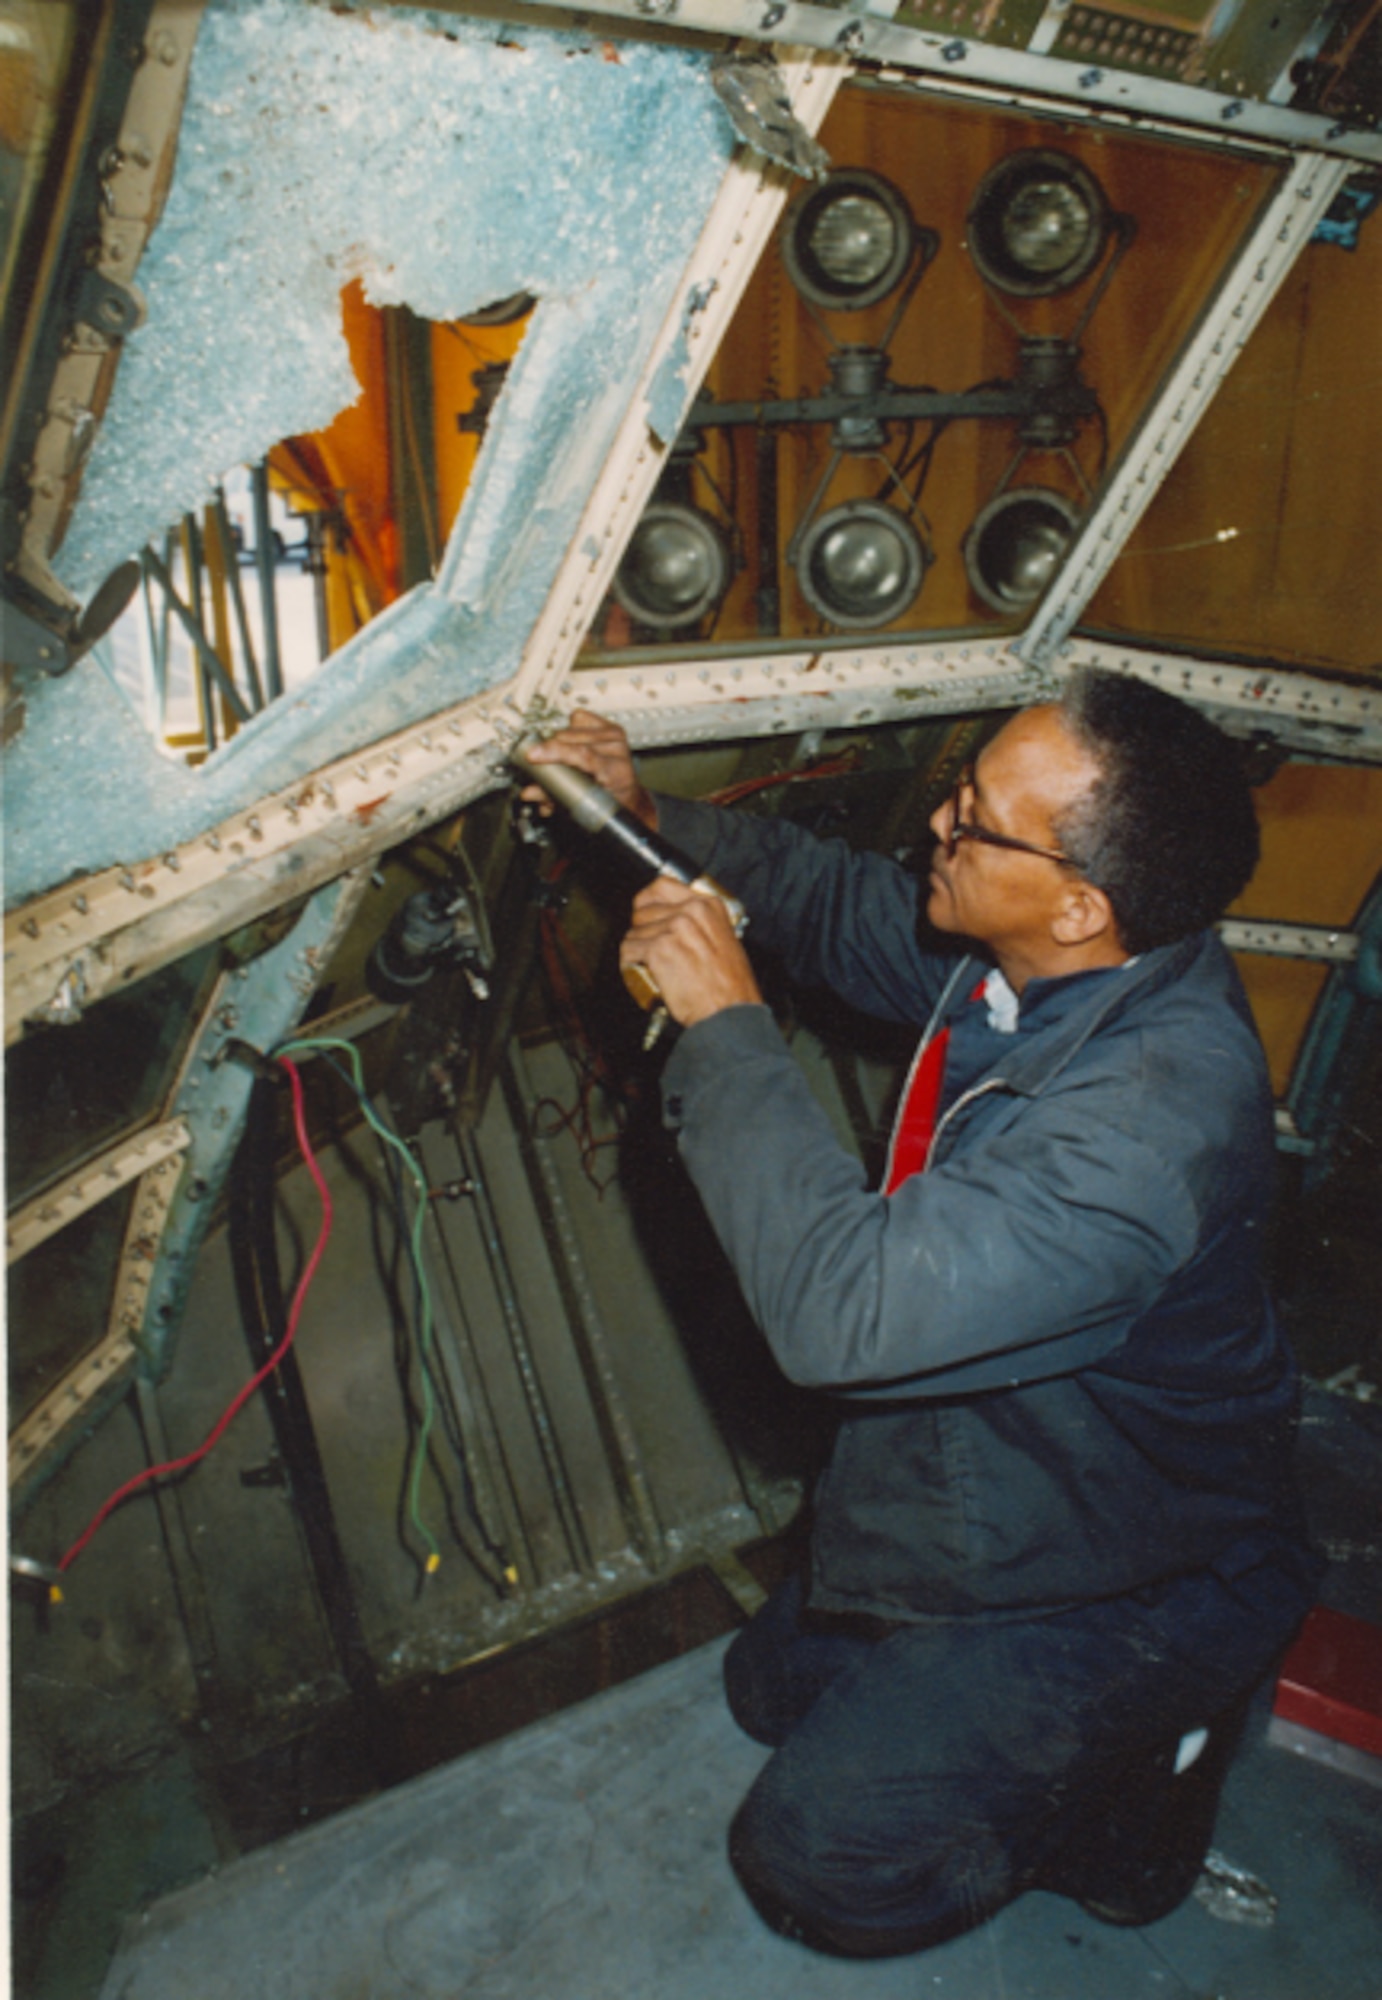 Bill Dillard, an outside machinist master, removes a shattered windshield in a mock C-130 Hercules cockpit tested at the Bird Impact Range at Arnold Air Force Base, Tennessee, in 1995. A chicken carcass fired at the range, most famously known as the “Chicken Gun” broke the windshield during simulated bird strike testing. The facility simulated in-flight bird strikes to aircraft canopies and other materials to aid manufacturers in the redesign and building of such components. The first shot from the Chicken Gun was fired 50 years ago. (U.S. Air Force photo)